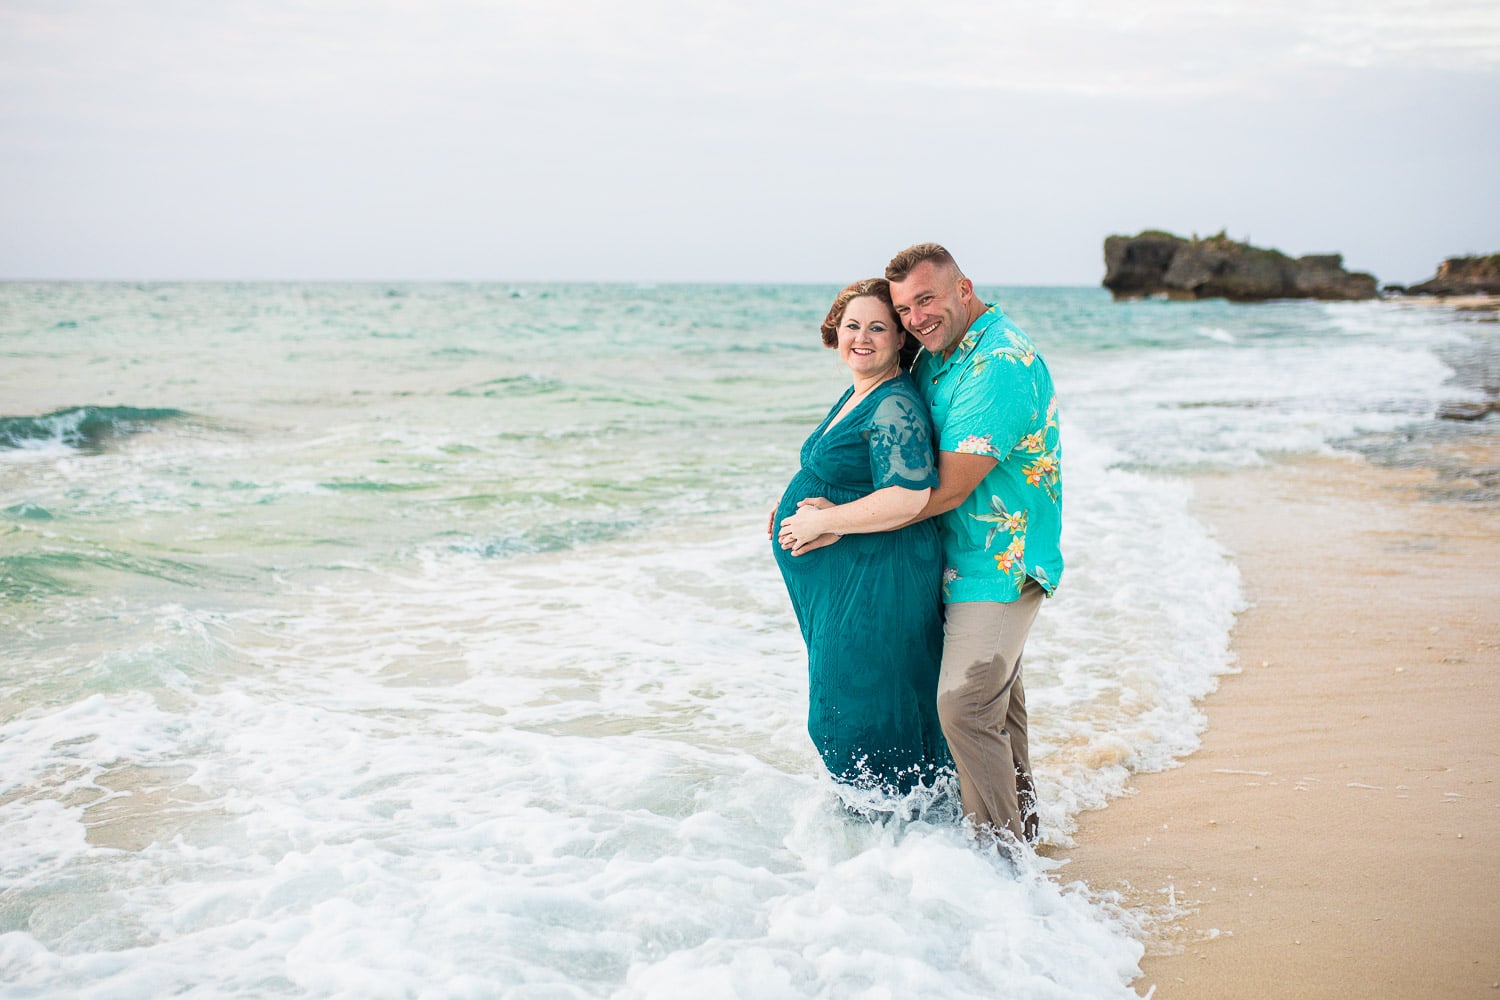 Maternity pregnancy photos on the beach in Okinawa Japan by Alison Bell Photographer.